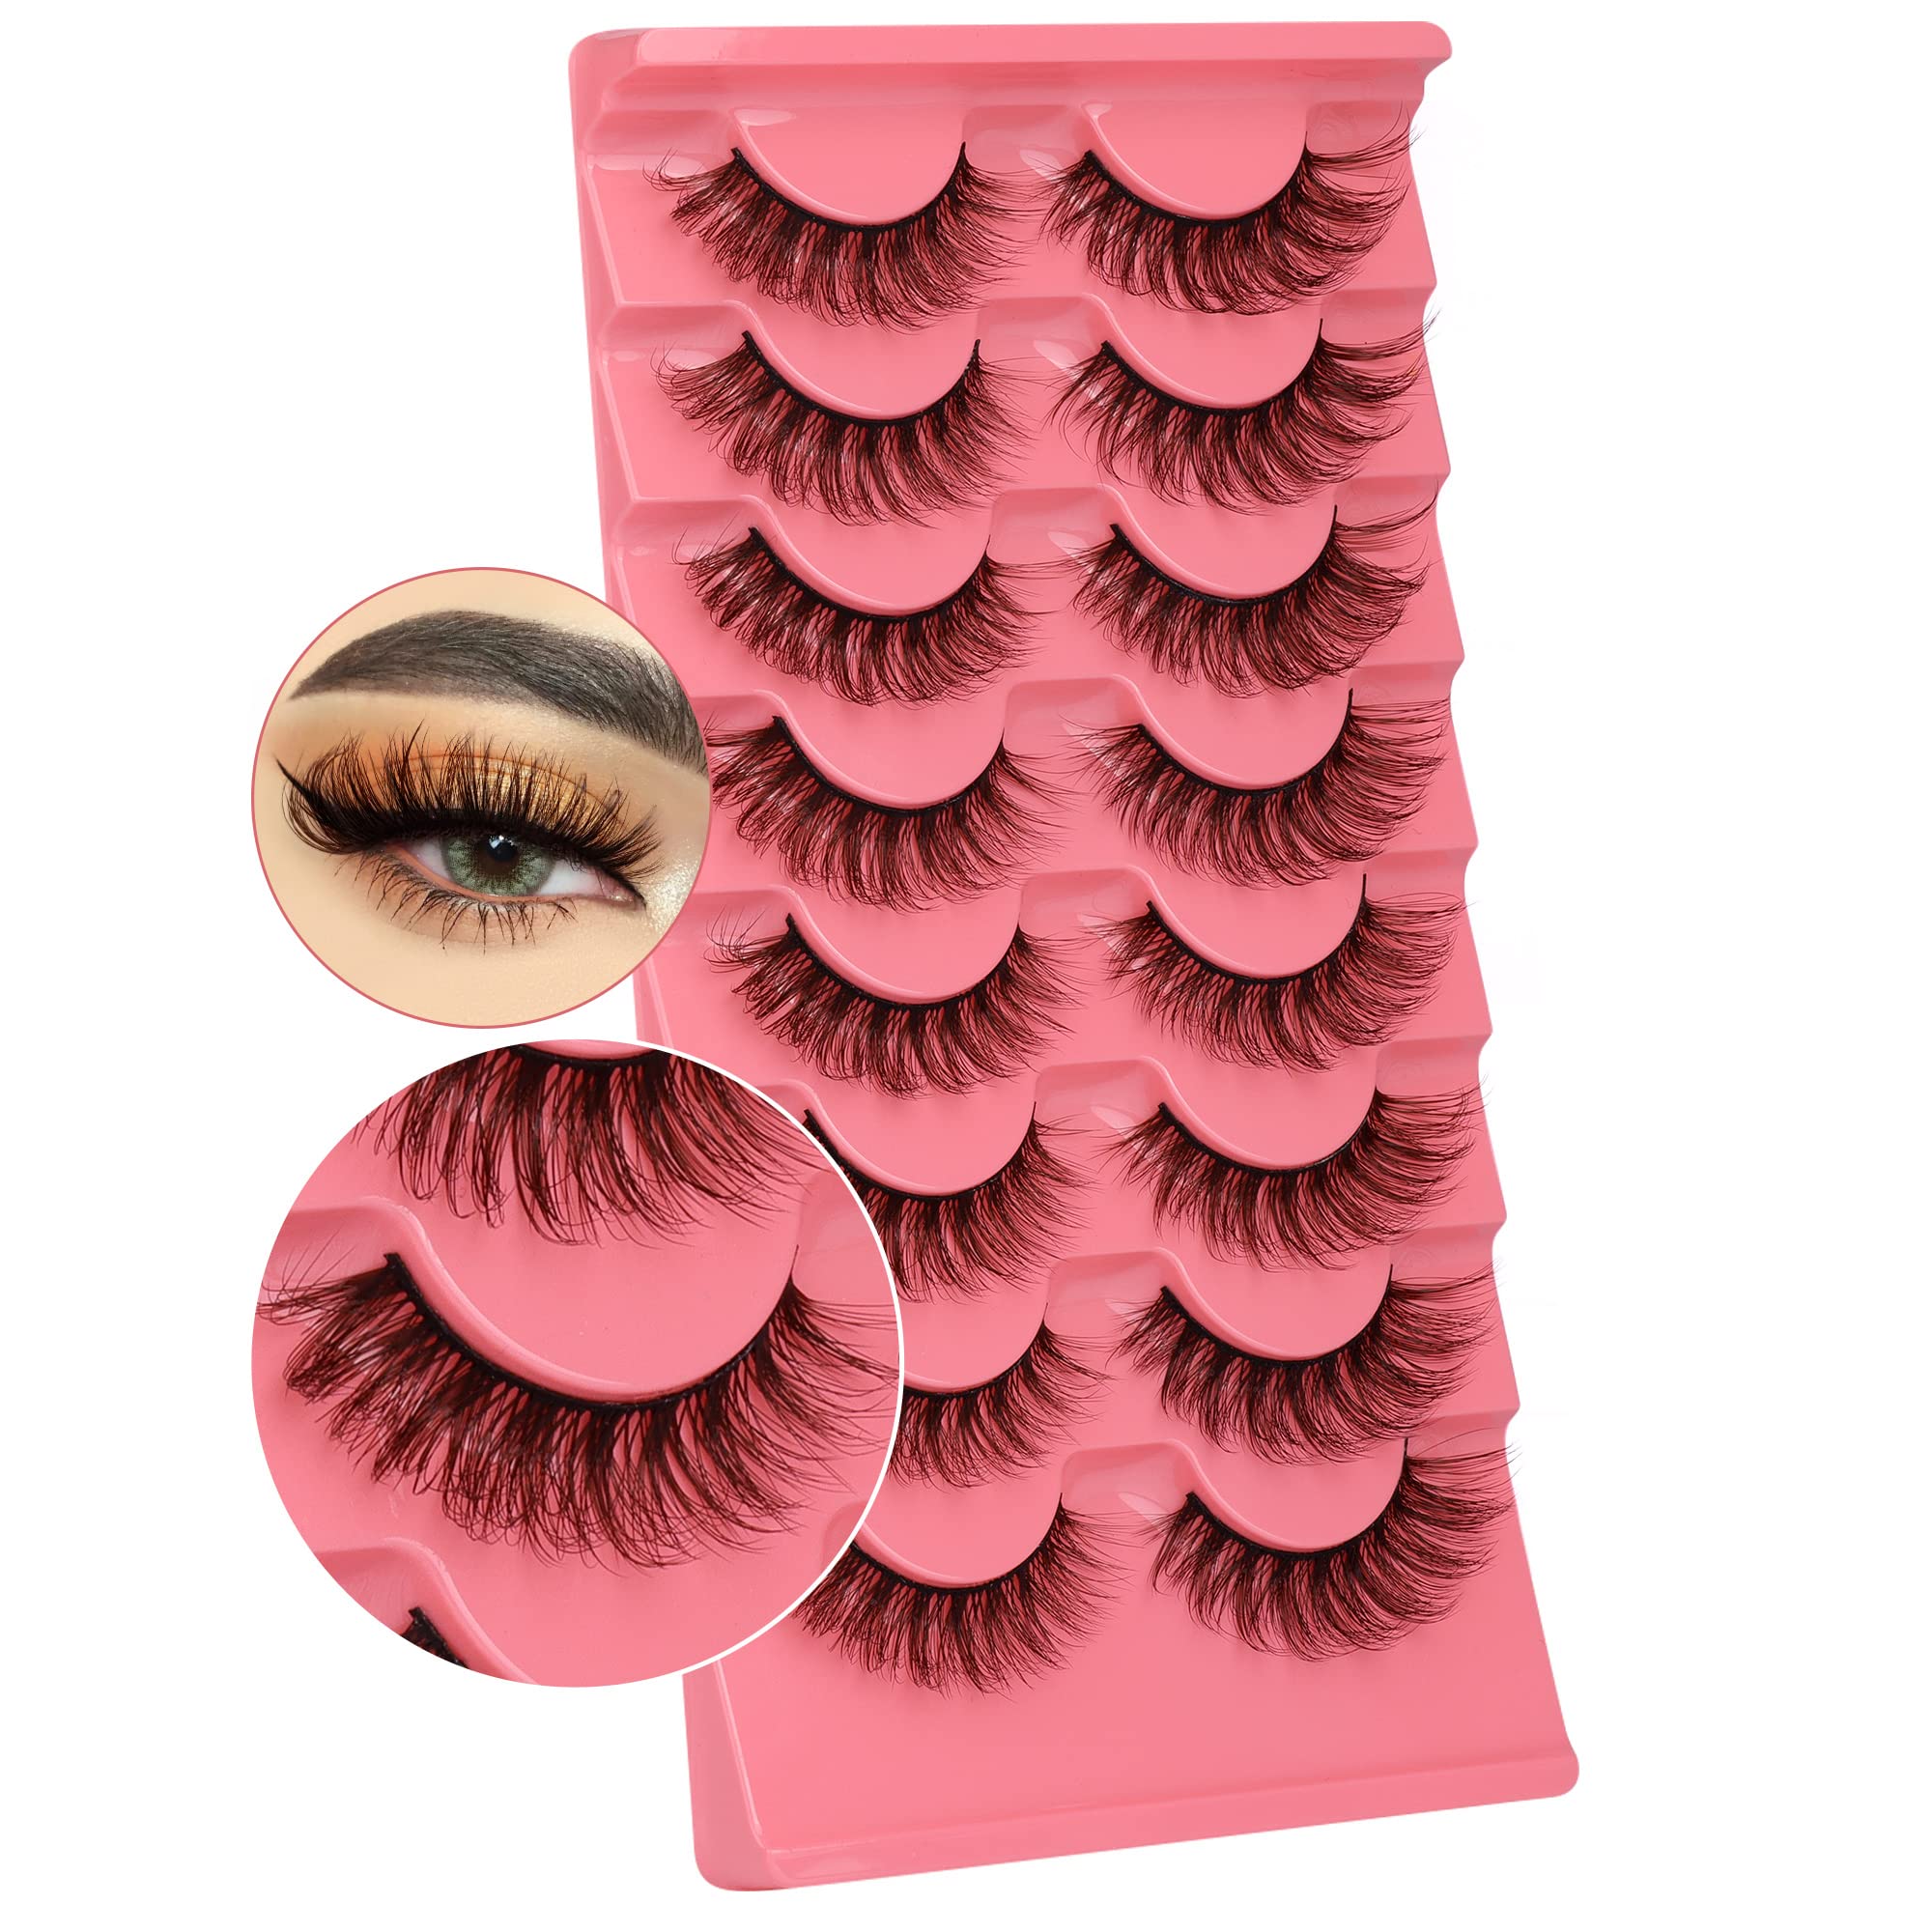 Brown Lashes Fluffy Curly Brown Colored Eyelashes Natural Look Wispy Mink False Eyelashes 20MM Long Russian Strip Lashes D Curl that Look Like Extensions 8 Pairs by wtvane